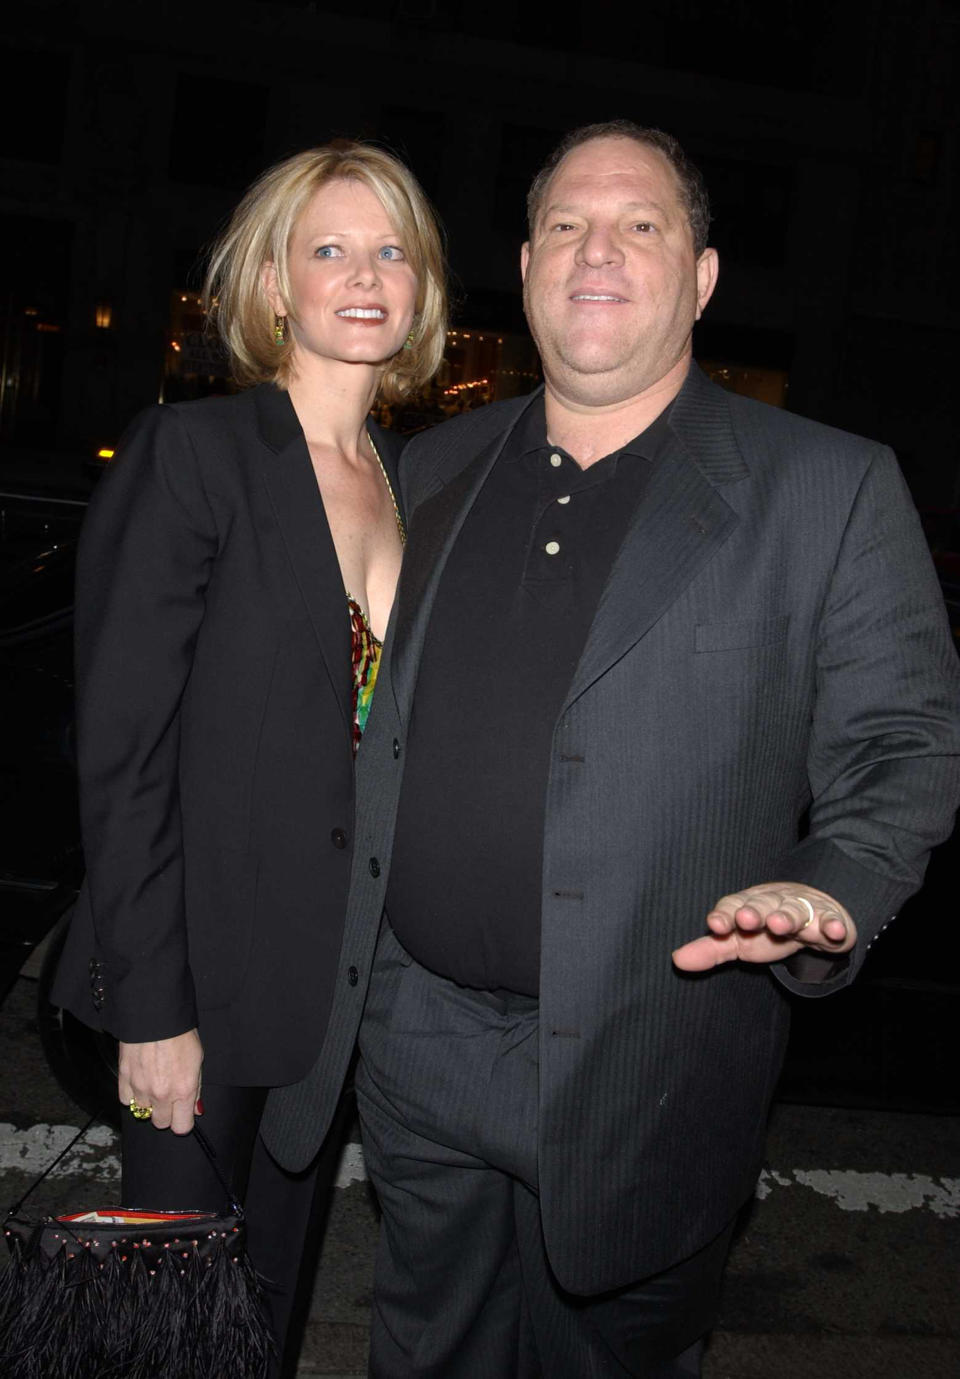 Eve Chilton and Harvey Weinstein in April 2002. (Photo: Getty Images)